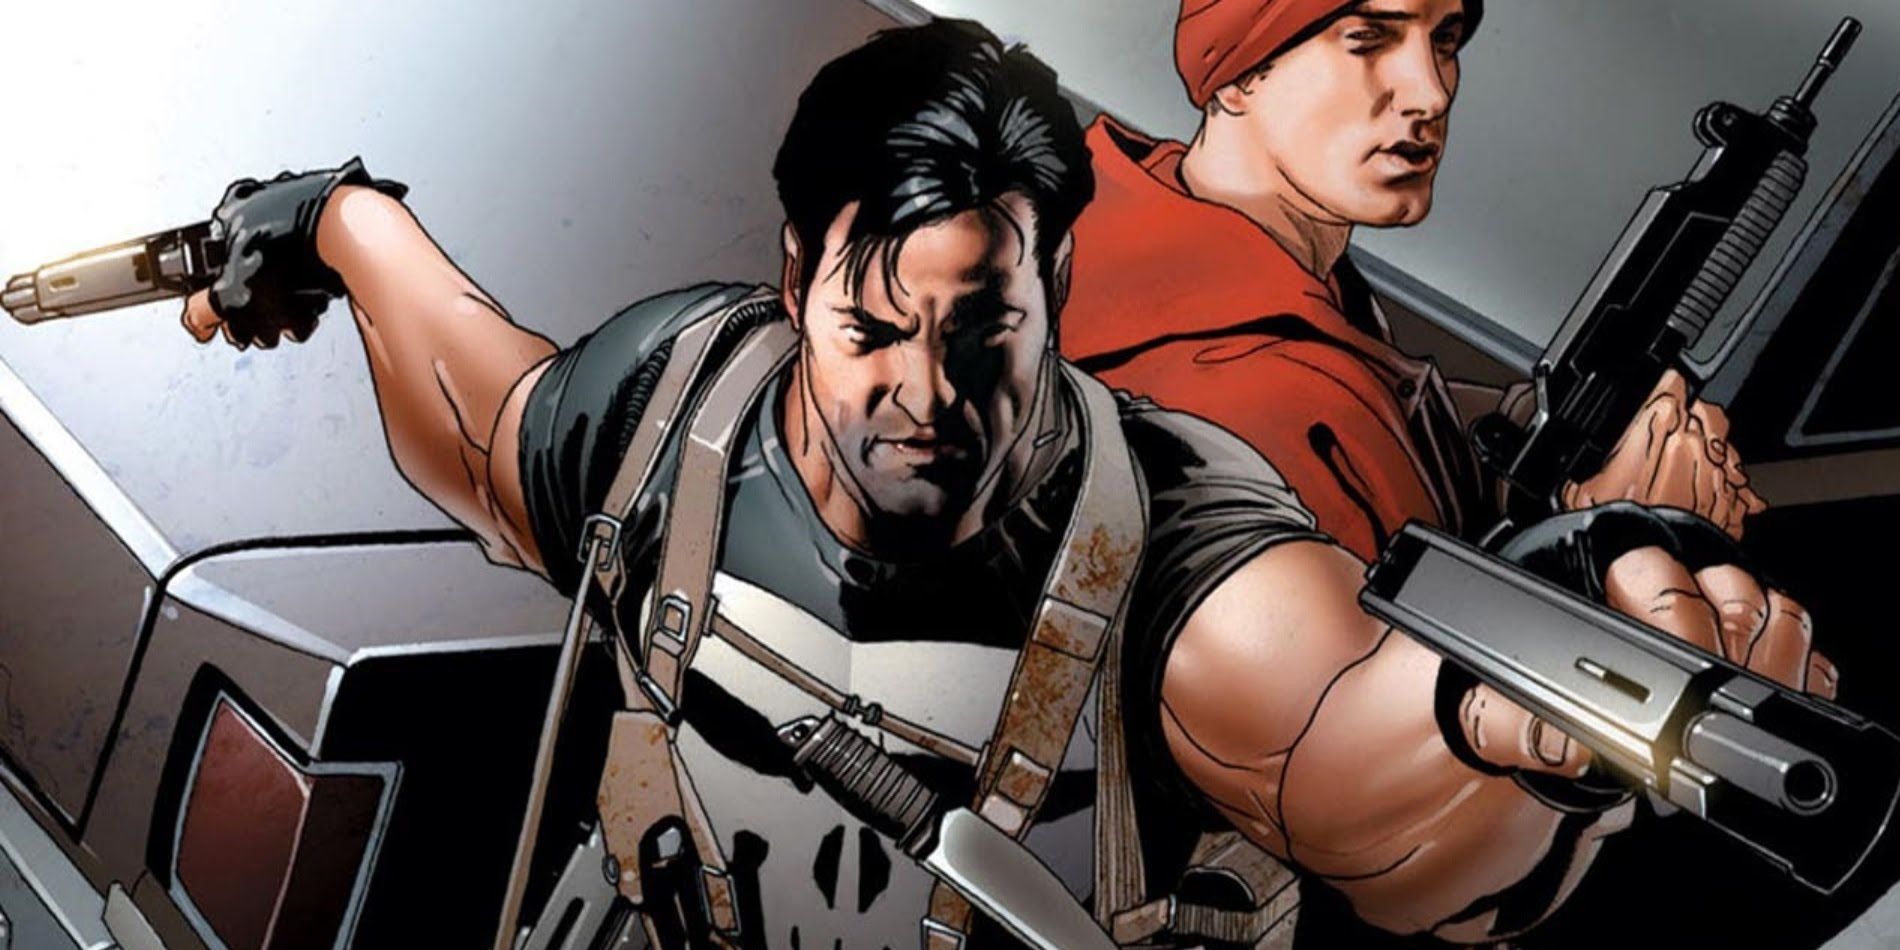 The Punisher and Eminem armed with guns on their comic cover